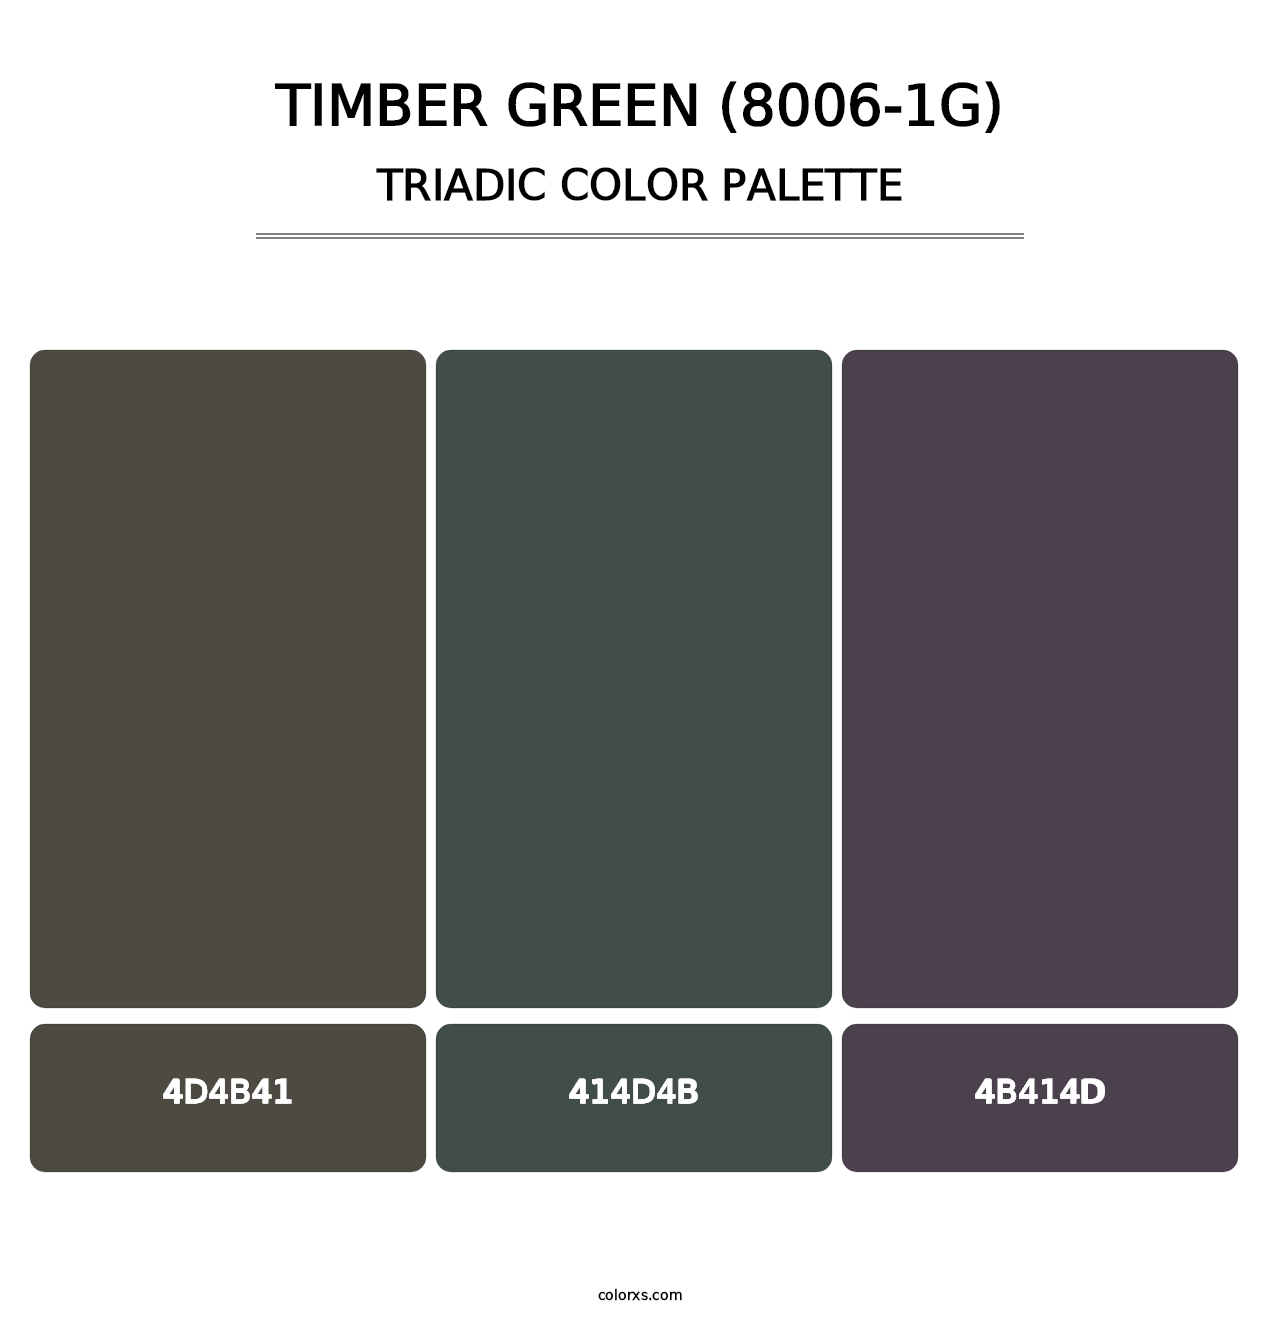 Timber Green (8006-1G) - Triadic Color Palette